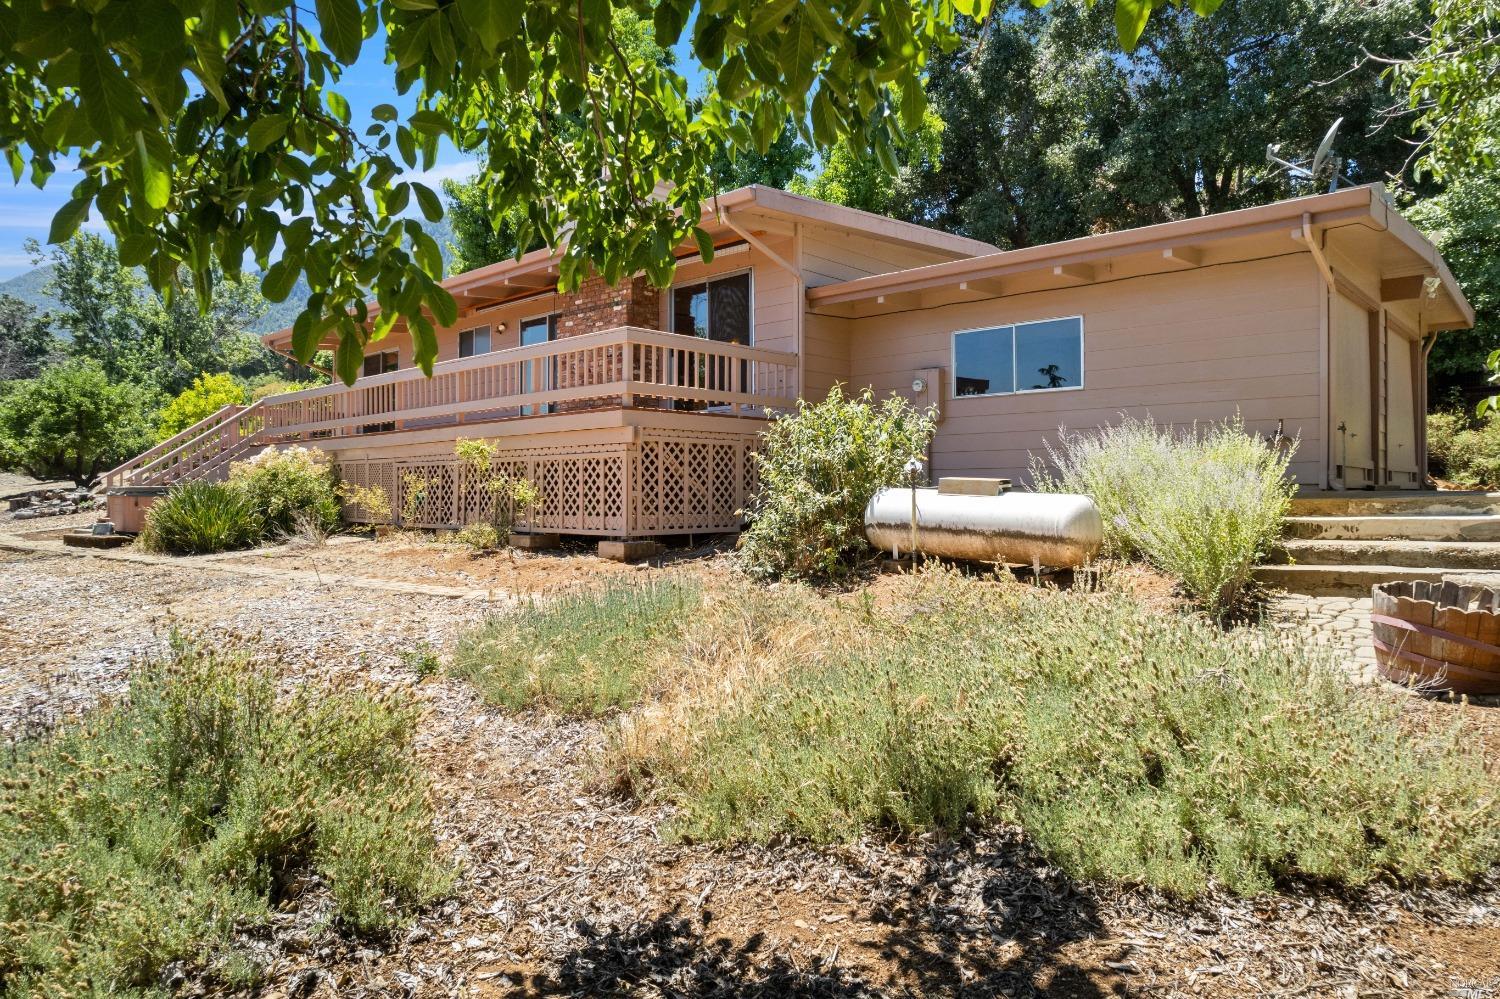 Photo of 8260 Orchard Dr in Kelseyville, CA